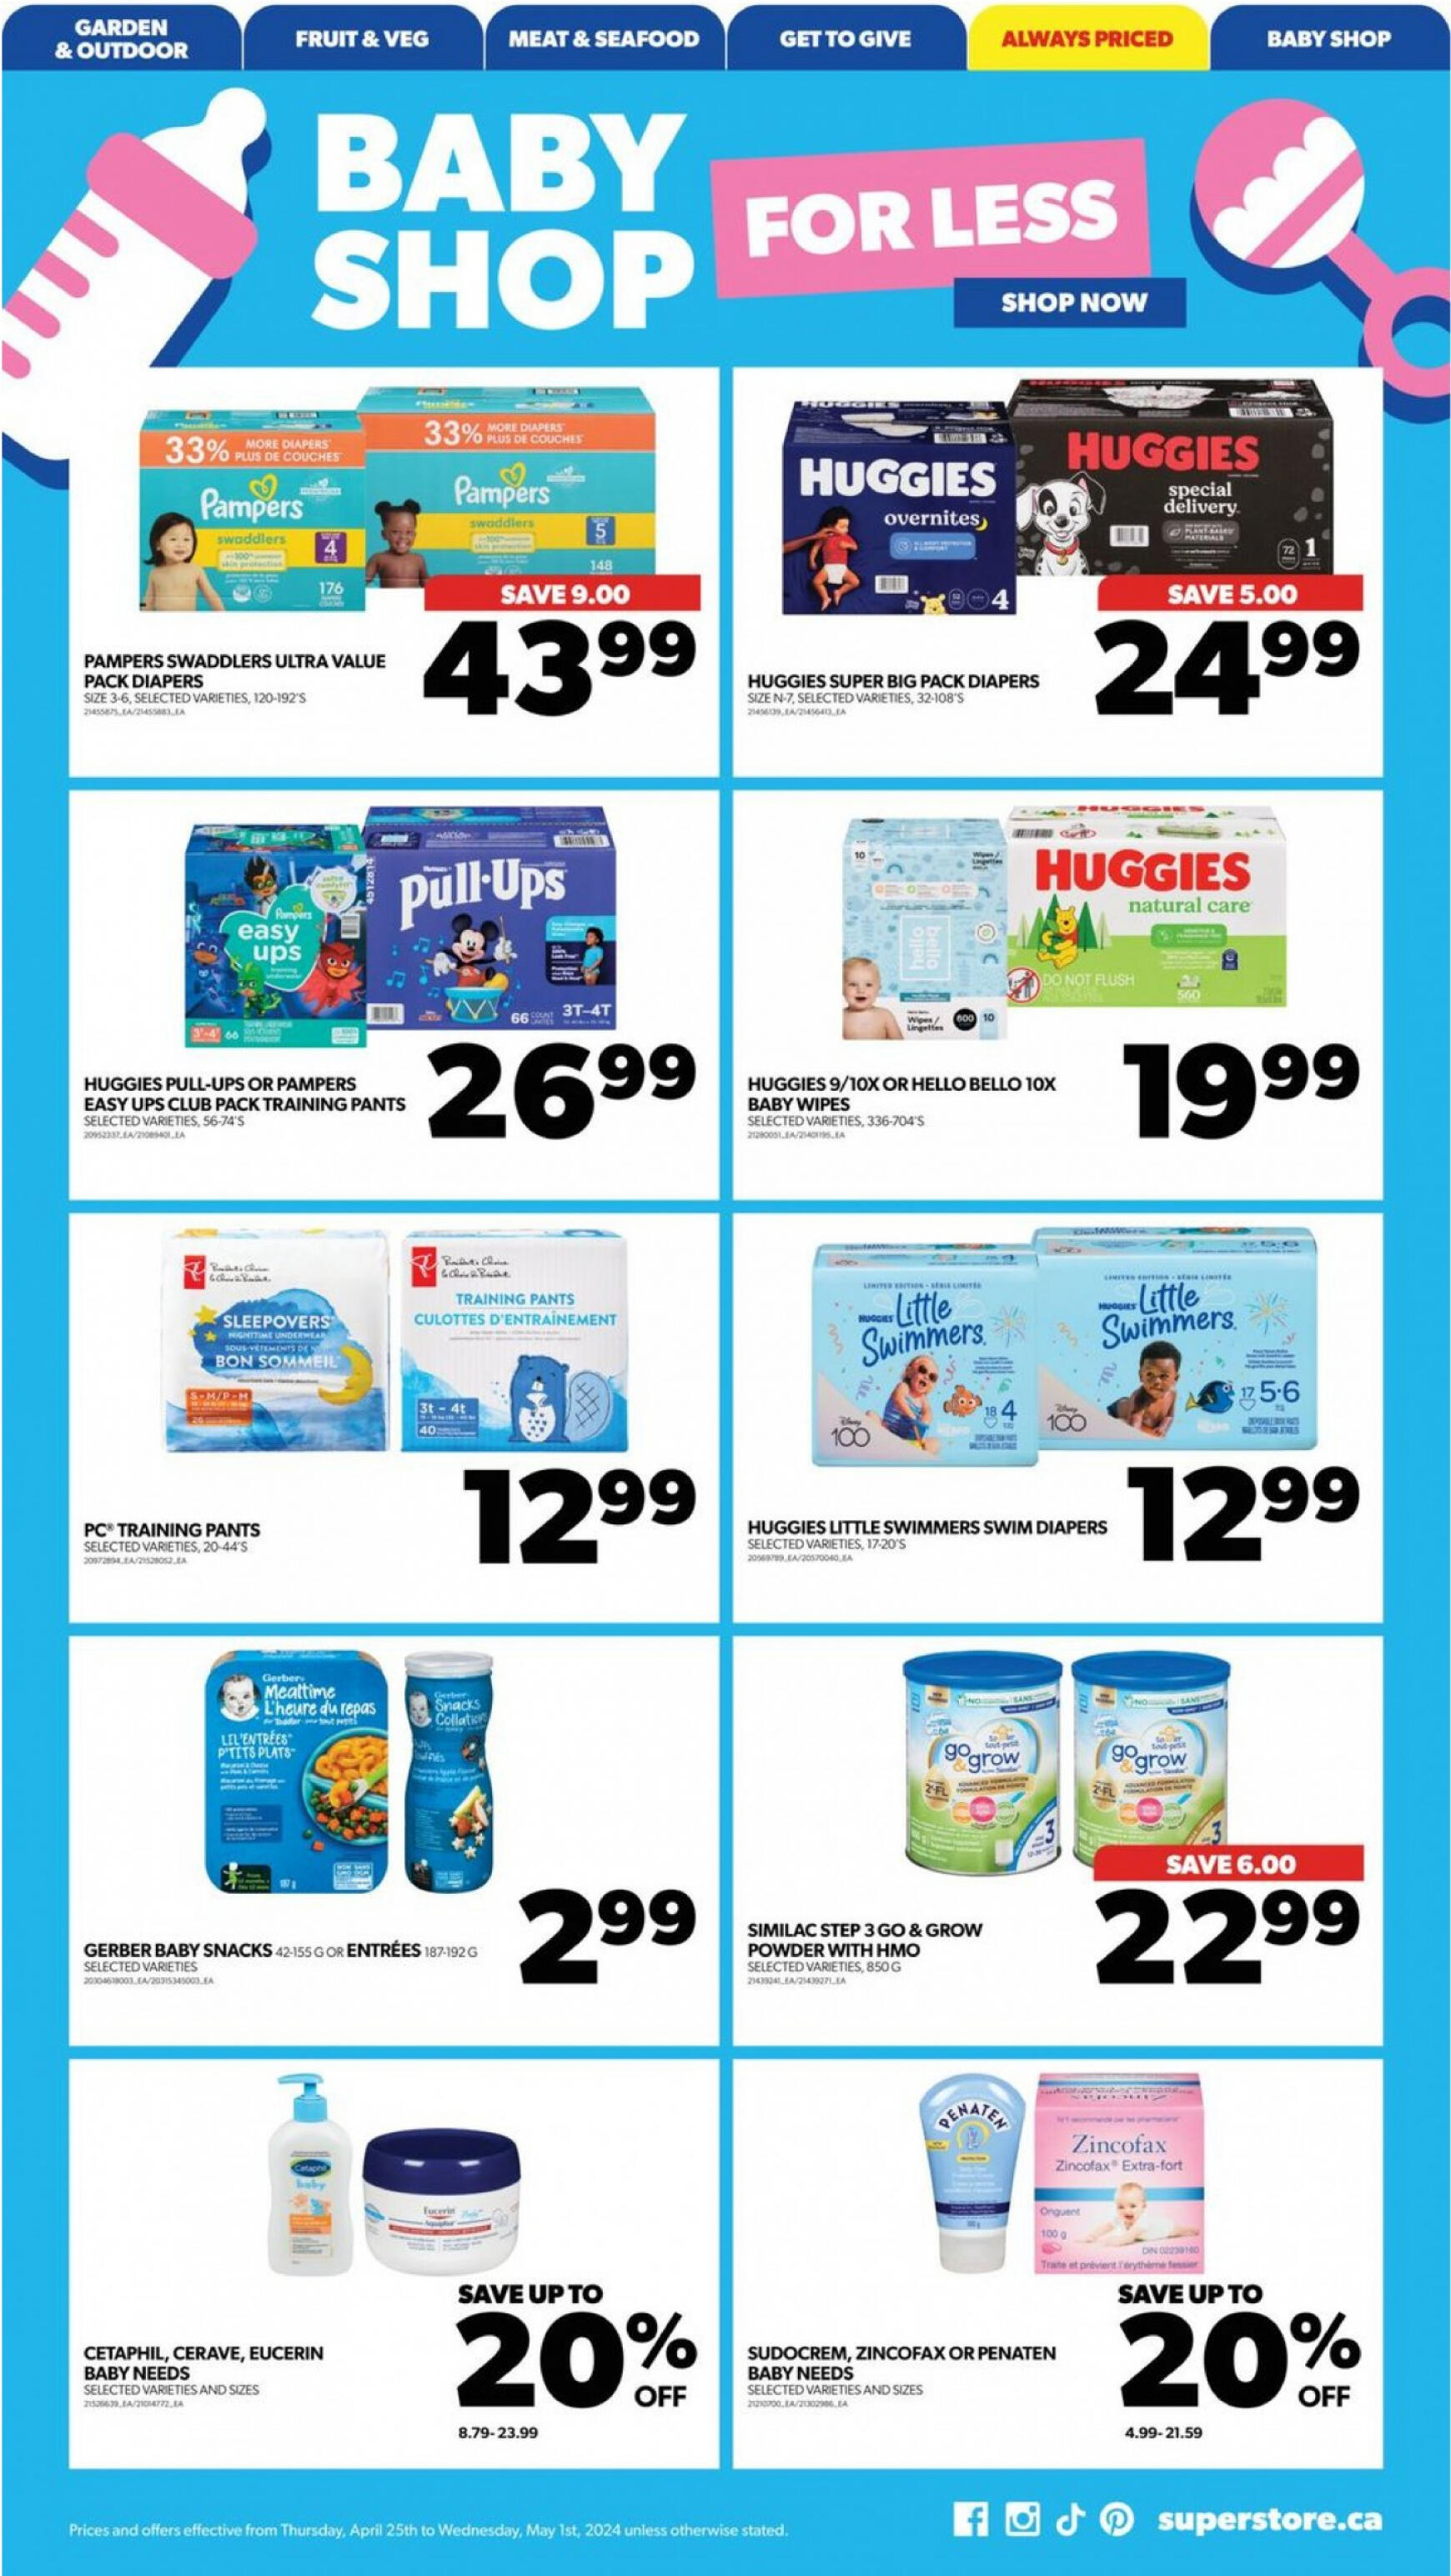 real-canadian-superstore - Real Canadian Superstore flyer current 01.05. - 31.05. - page: 22